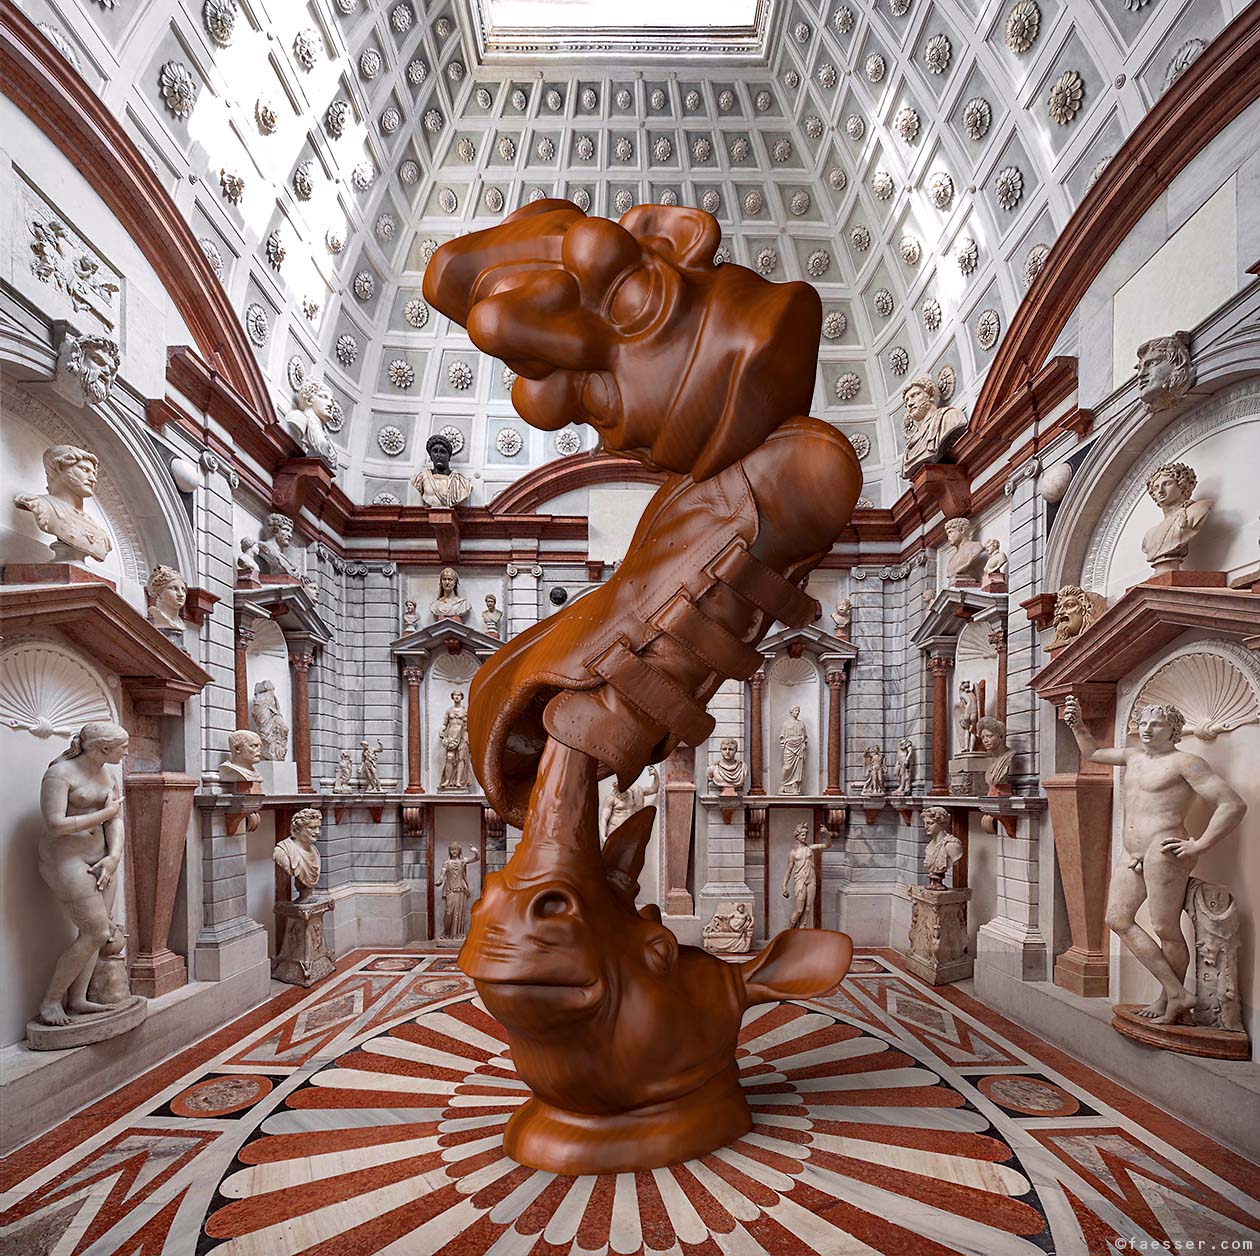 Rhynoceros juggles an Adidas tennis shoe with Punch figure on the top; virtual exhibition at Palazzo Grimani in Venice; artist Roland Faesser, sculptor and painter 2023